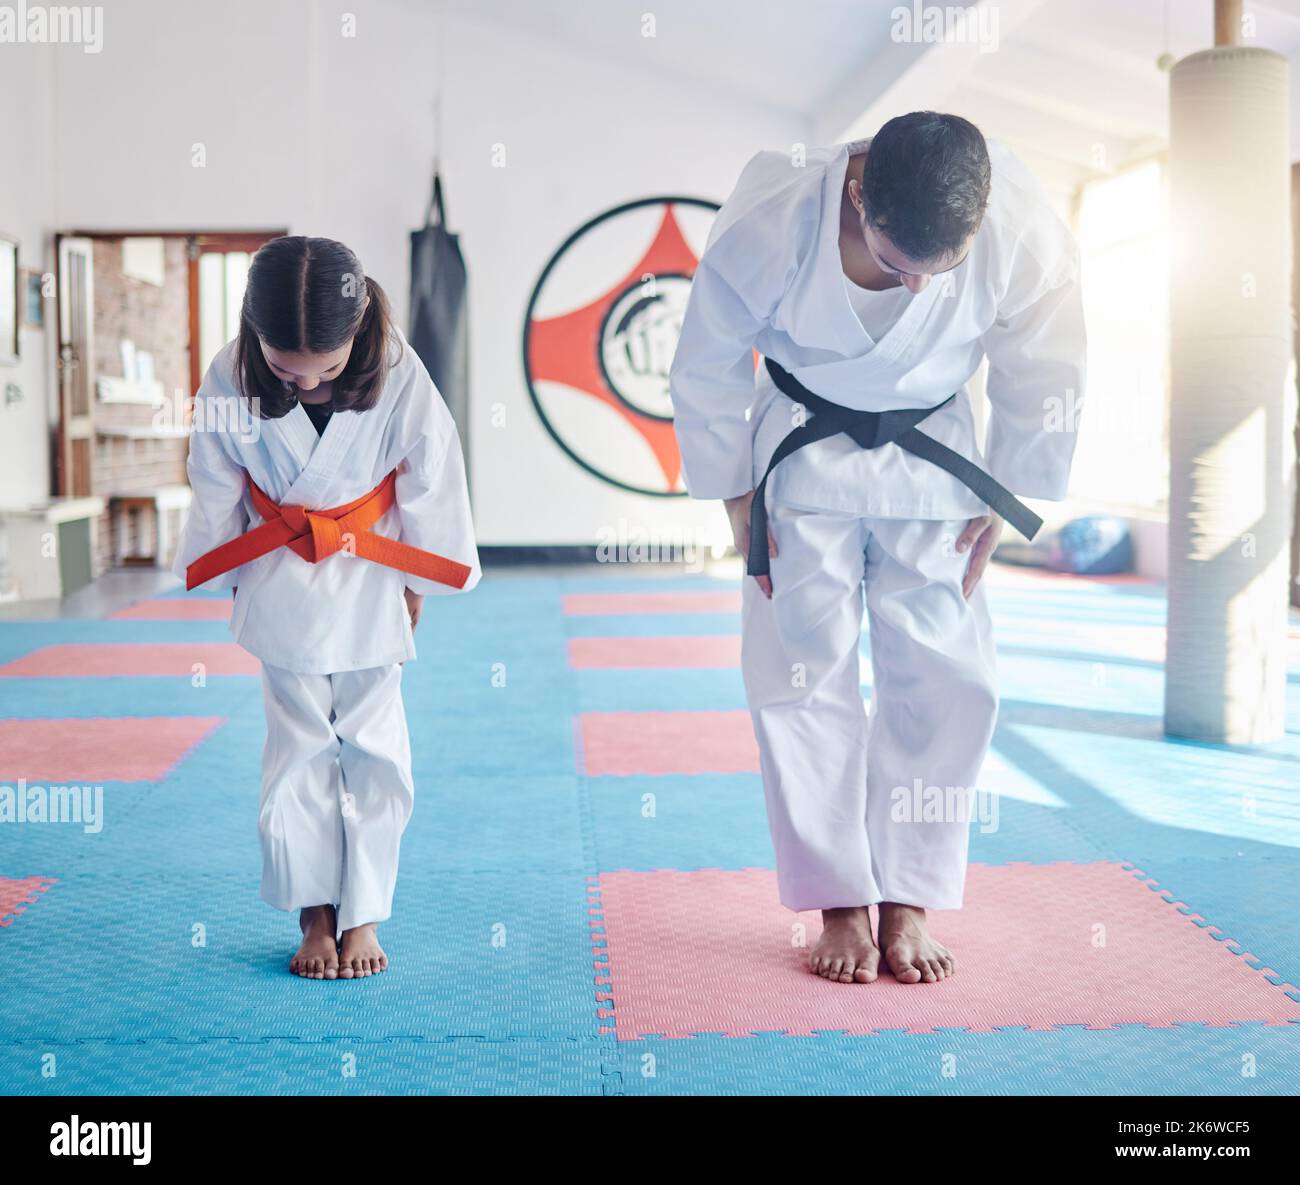 Give respect, get respect. a young man and cute little girl practicing karate in a studio. Stock Photo